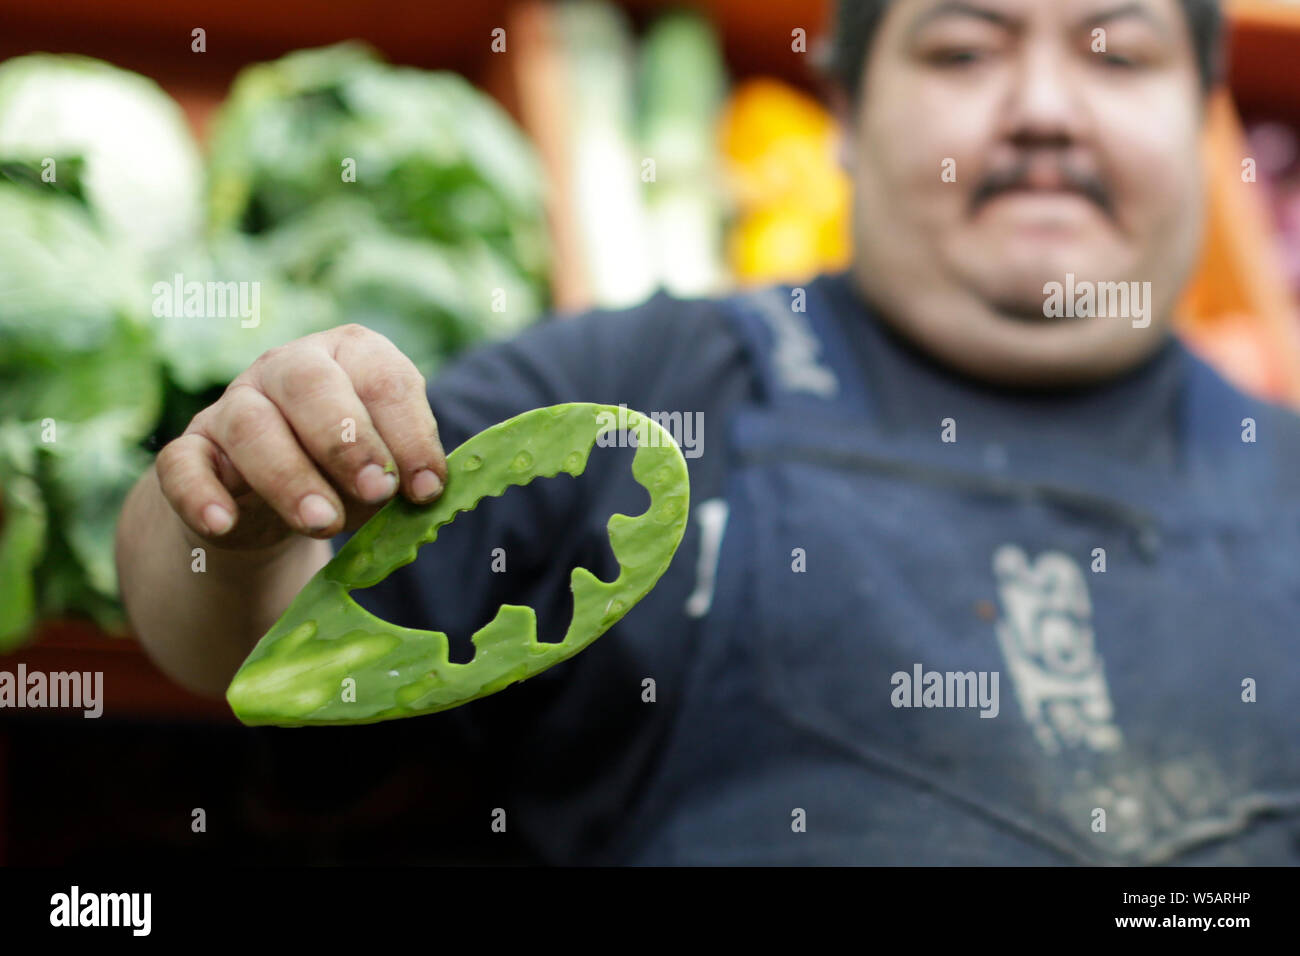 Mexico City, Mexico. 24th July, 2019. A vendor shows a dragon-shaped cactus leaf in Mexico City, capital of Mexico, July 24, 2019. By making cactus leaves of cartoon-like shape, the vendor hopes to encourage children to eat more vegetables and have a balanced diet. Credit: Francisco Canedo/Xinhua/Alamy Live News Stock Photo